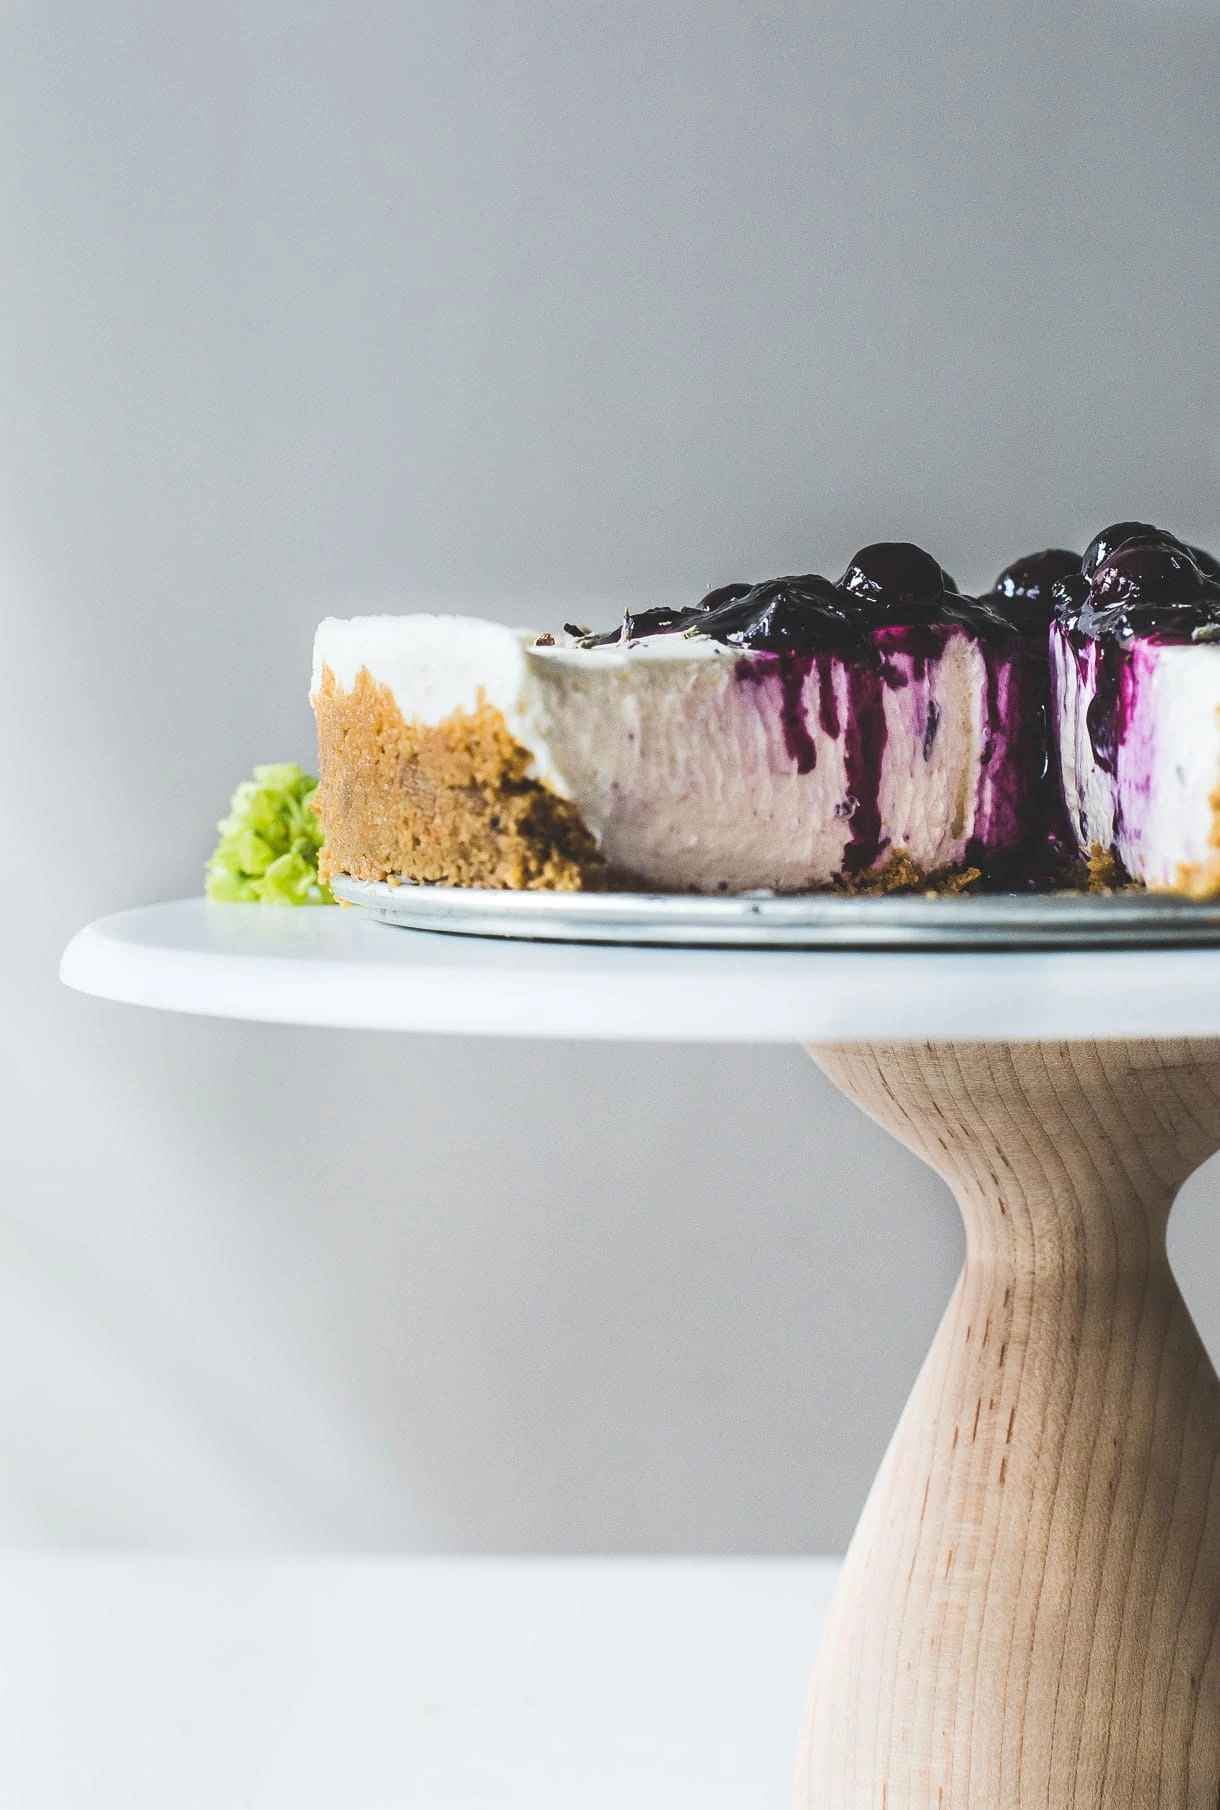 No Bake Blueberry Cheese with gluten-free crust